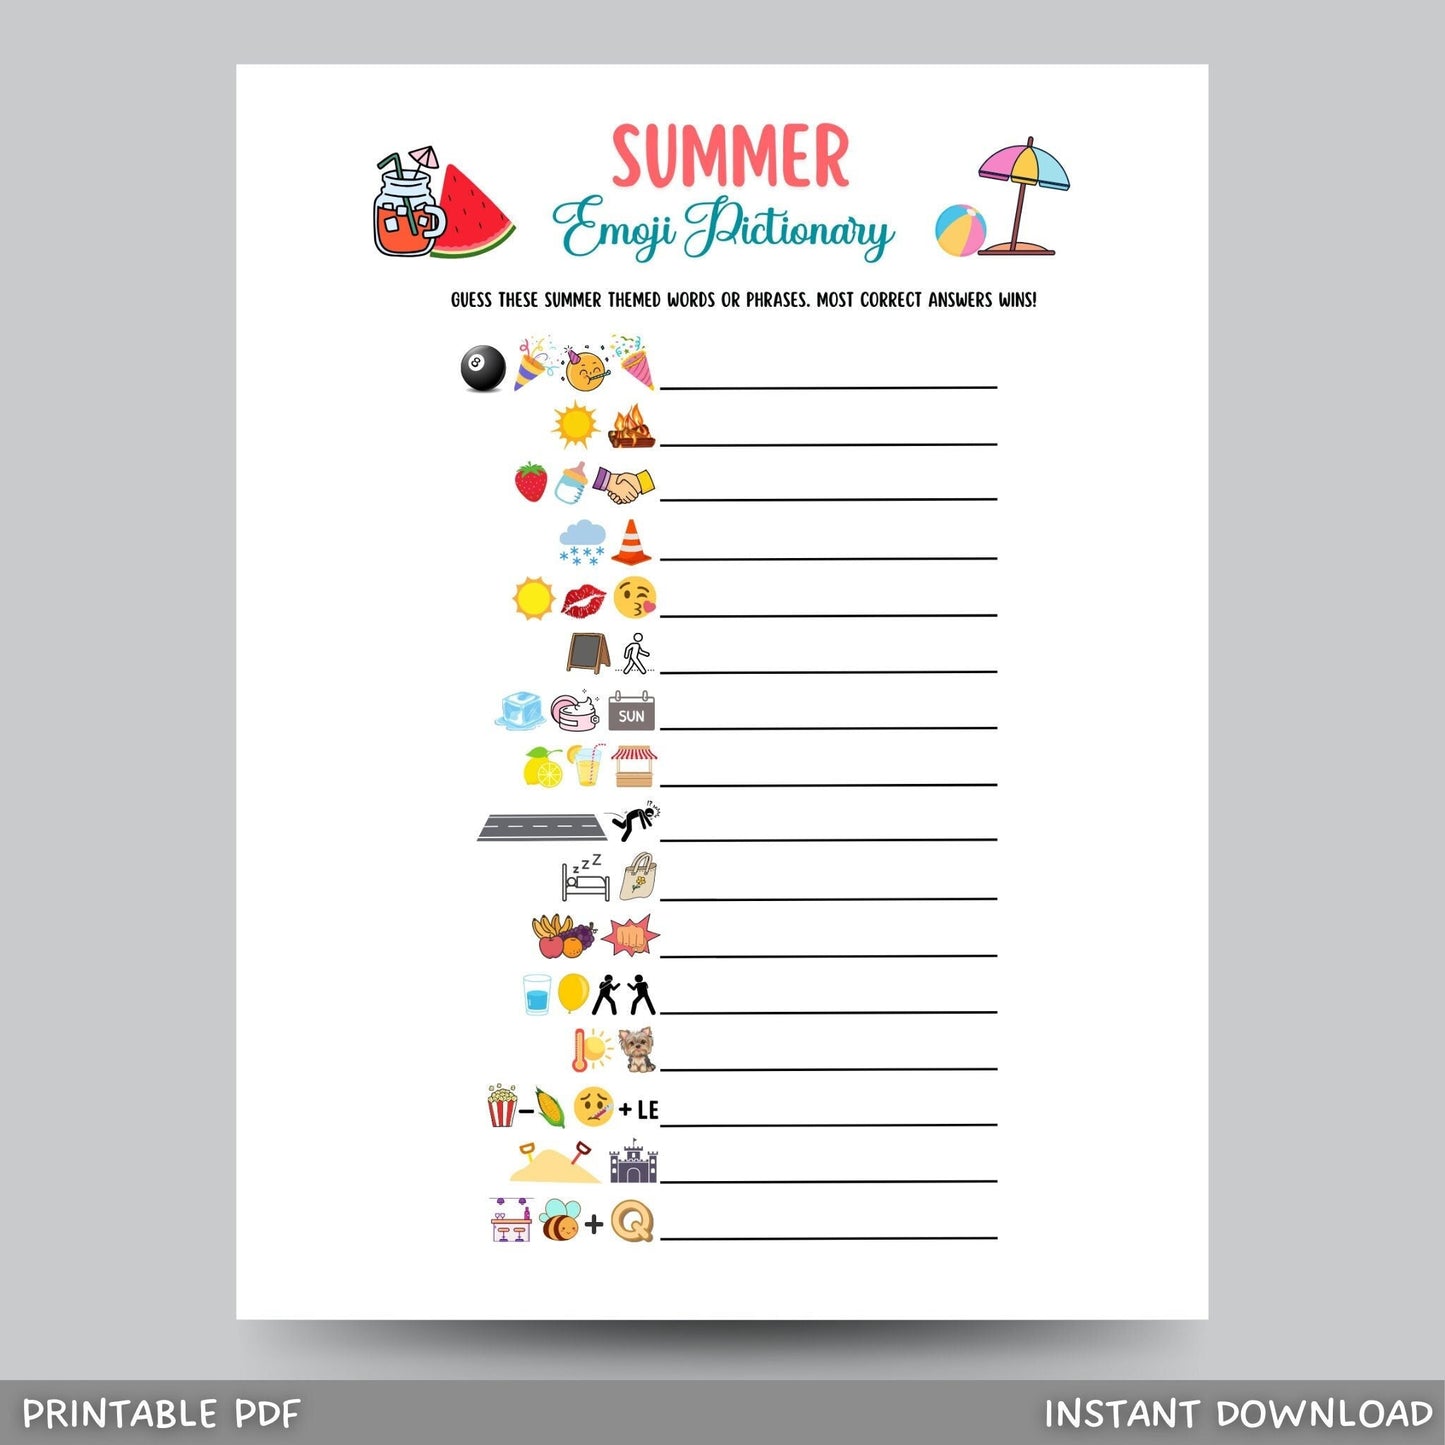 Summer Emoji Pictionary Game Printable, Summertime Activities for Adults & Kids, Fun Pool Party Games, Family Trivia Game, Emoji Quiz Game